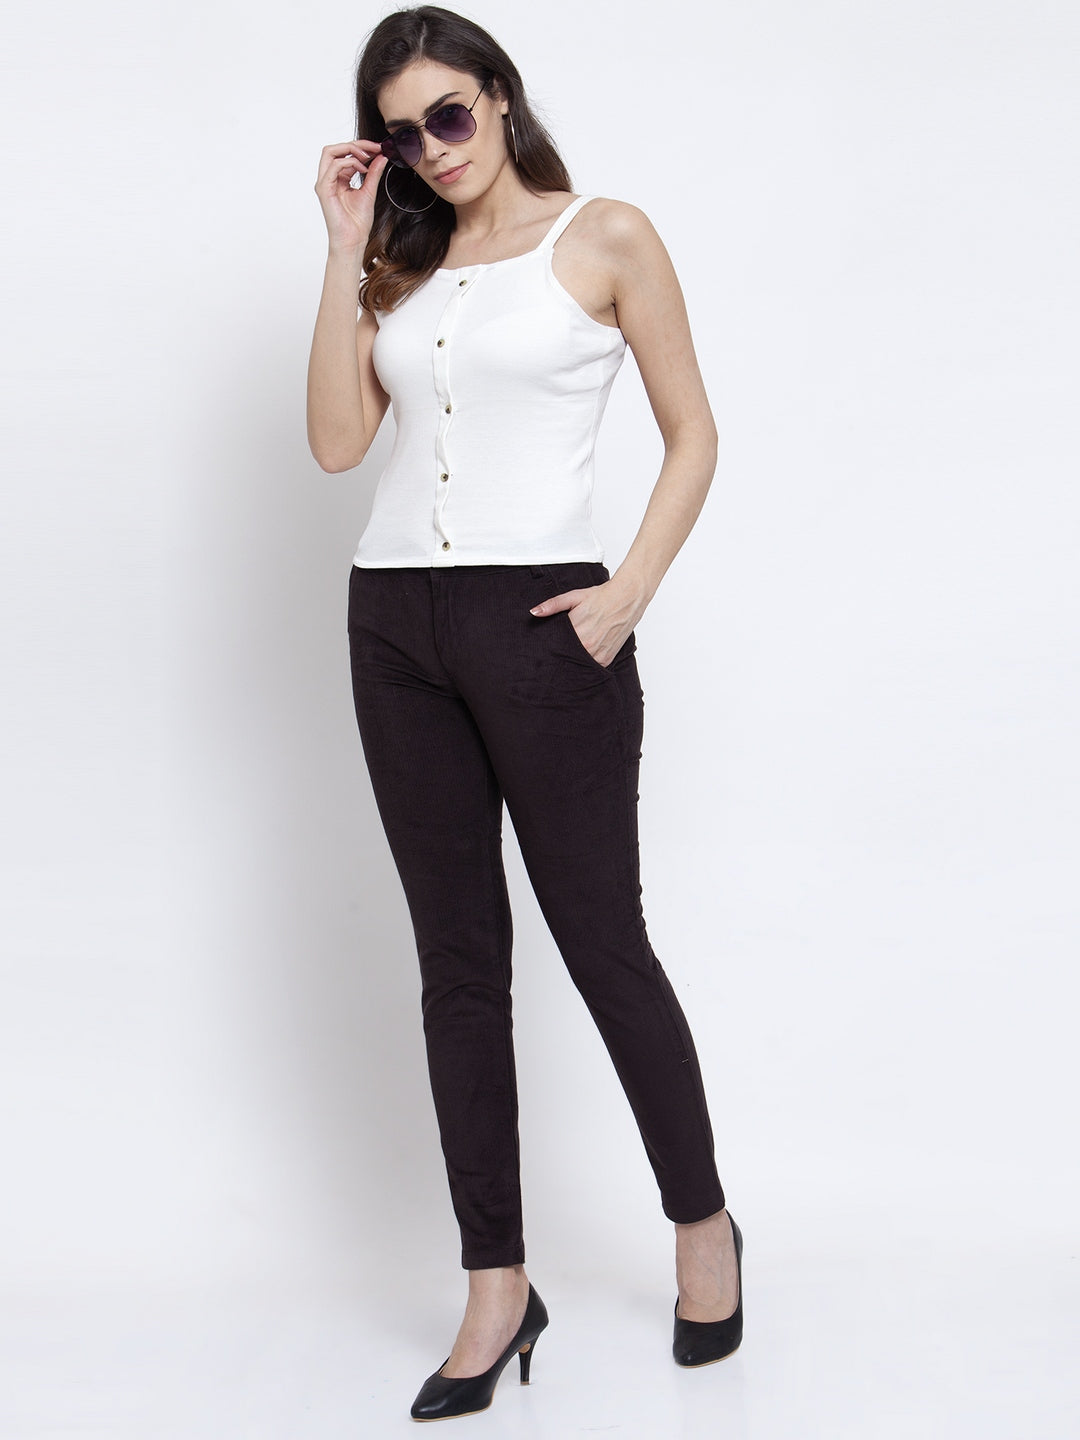 Buy Western Links Purple Cotrise Pants for Women Online  799 from  ShopClues